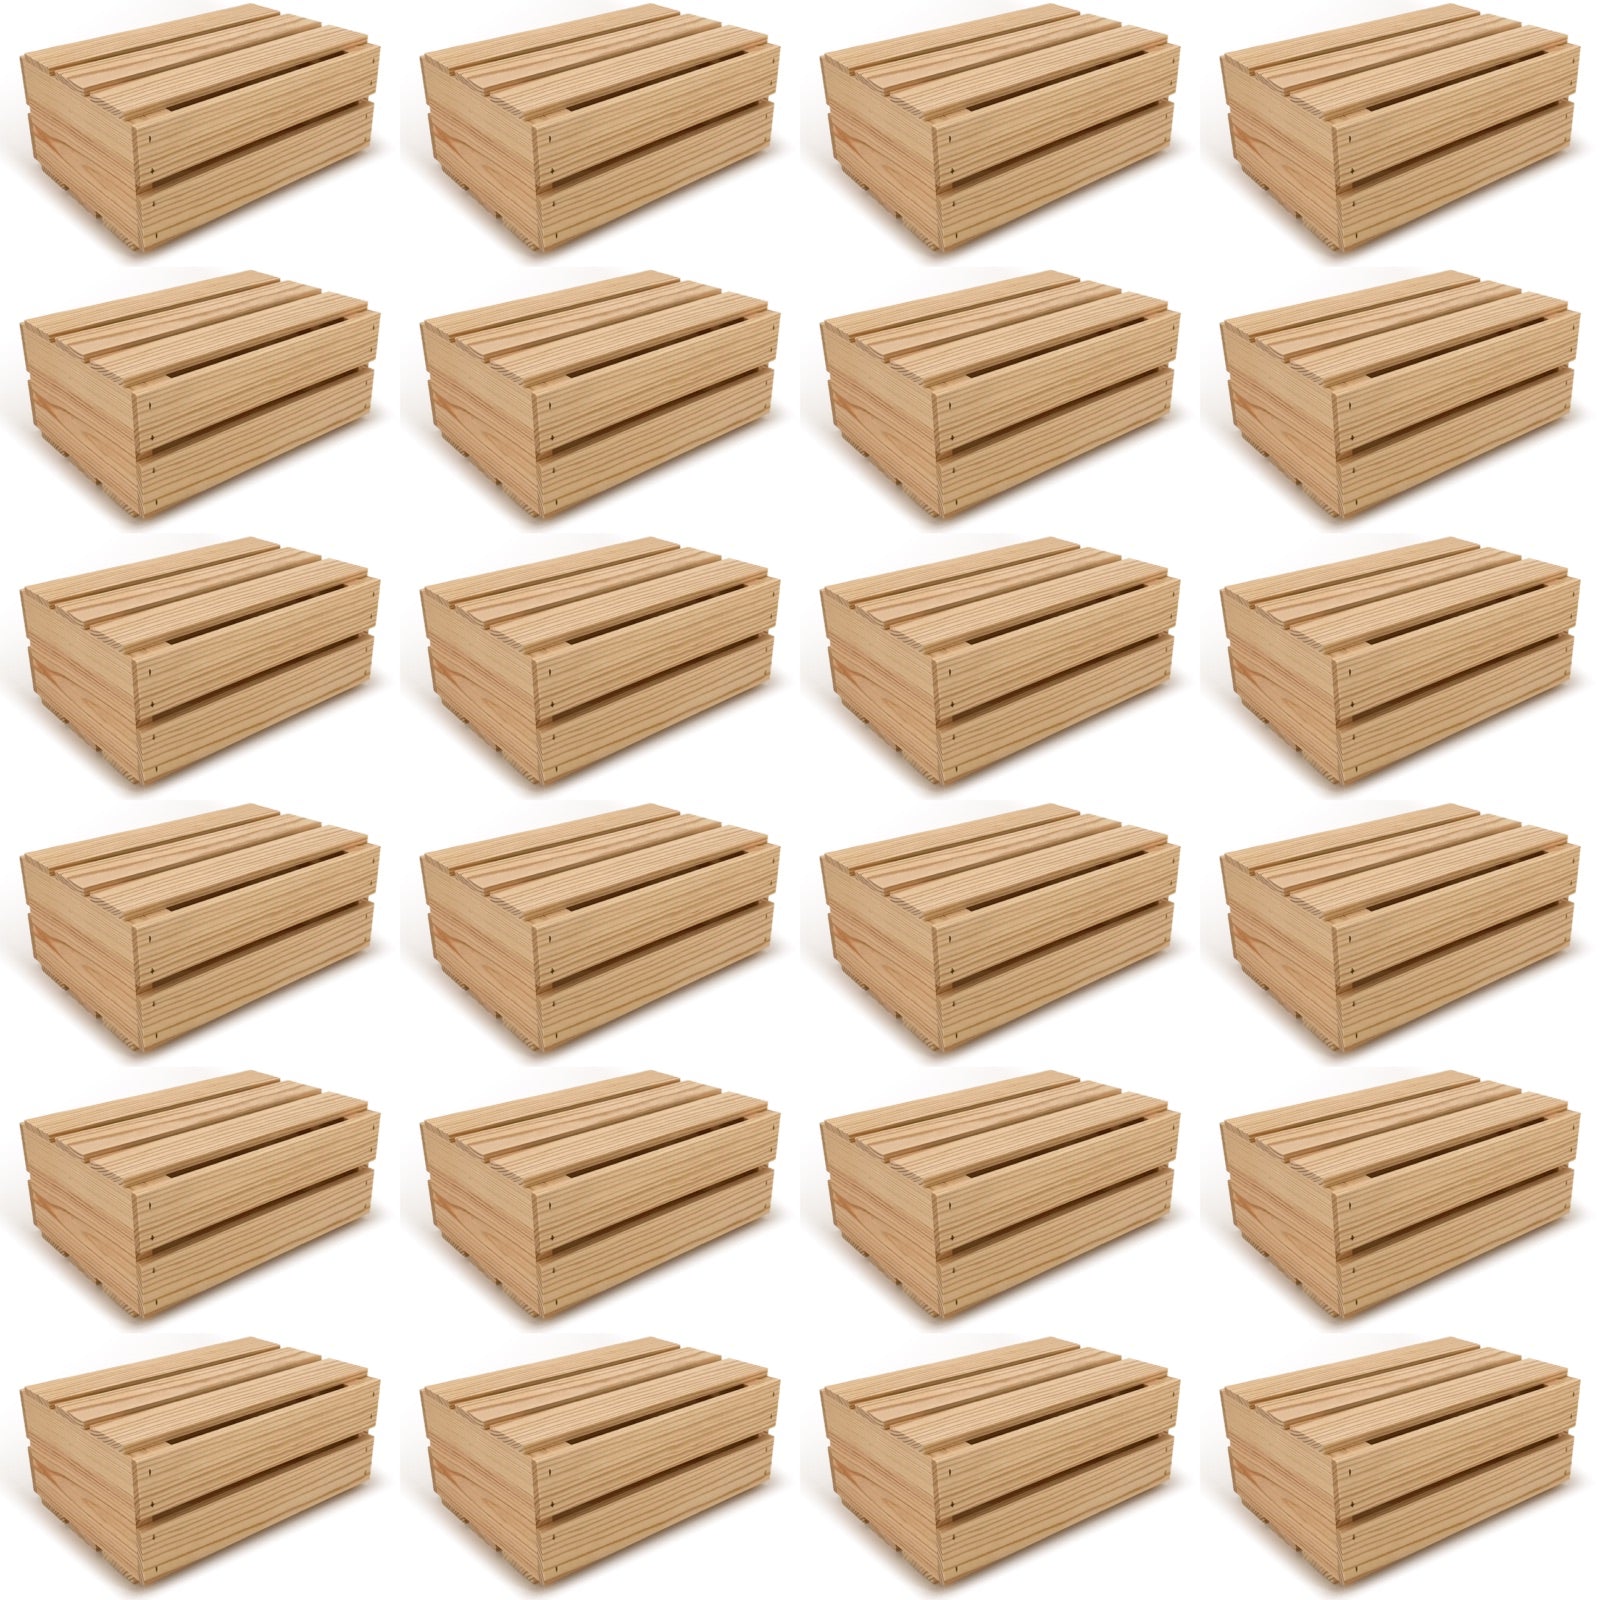 24 Small wooden crates with lid 12x9x5.25